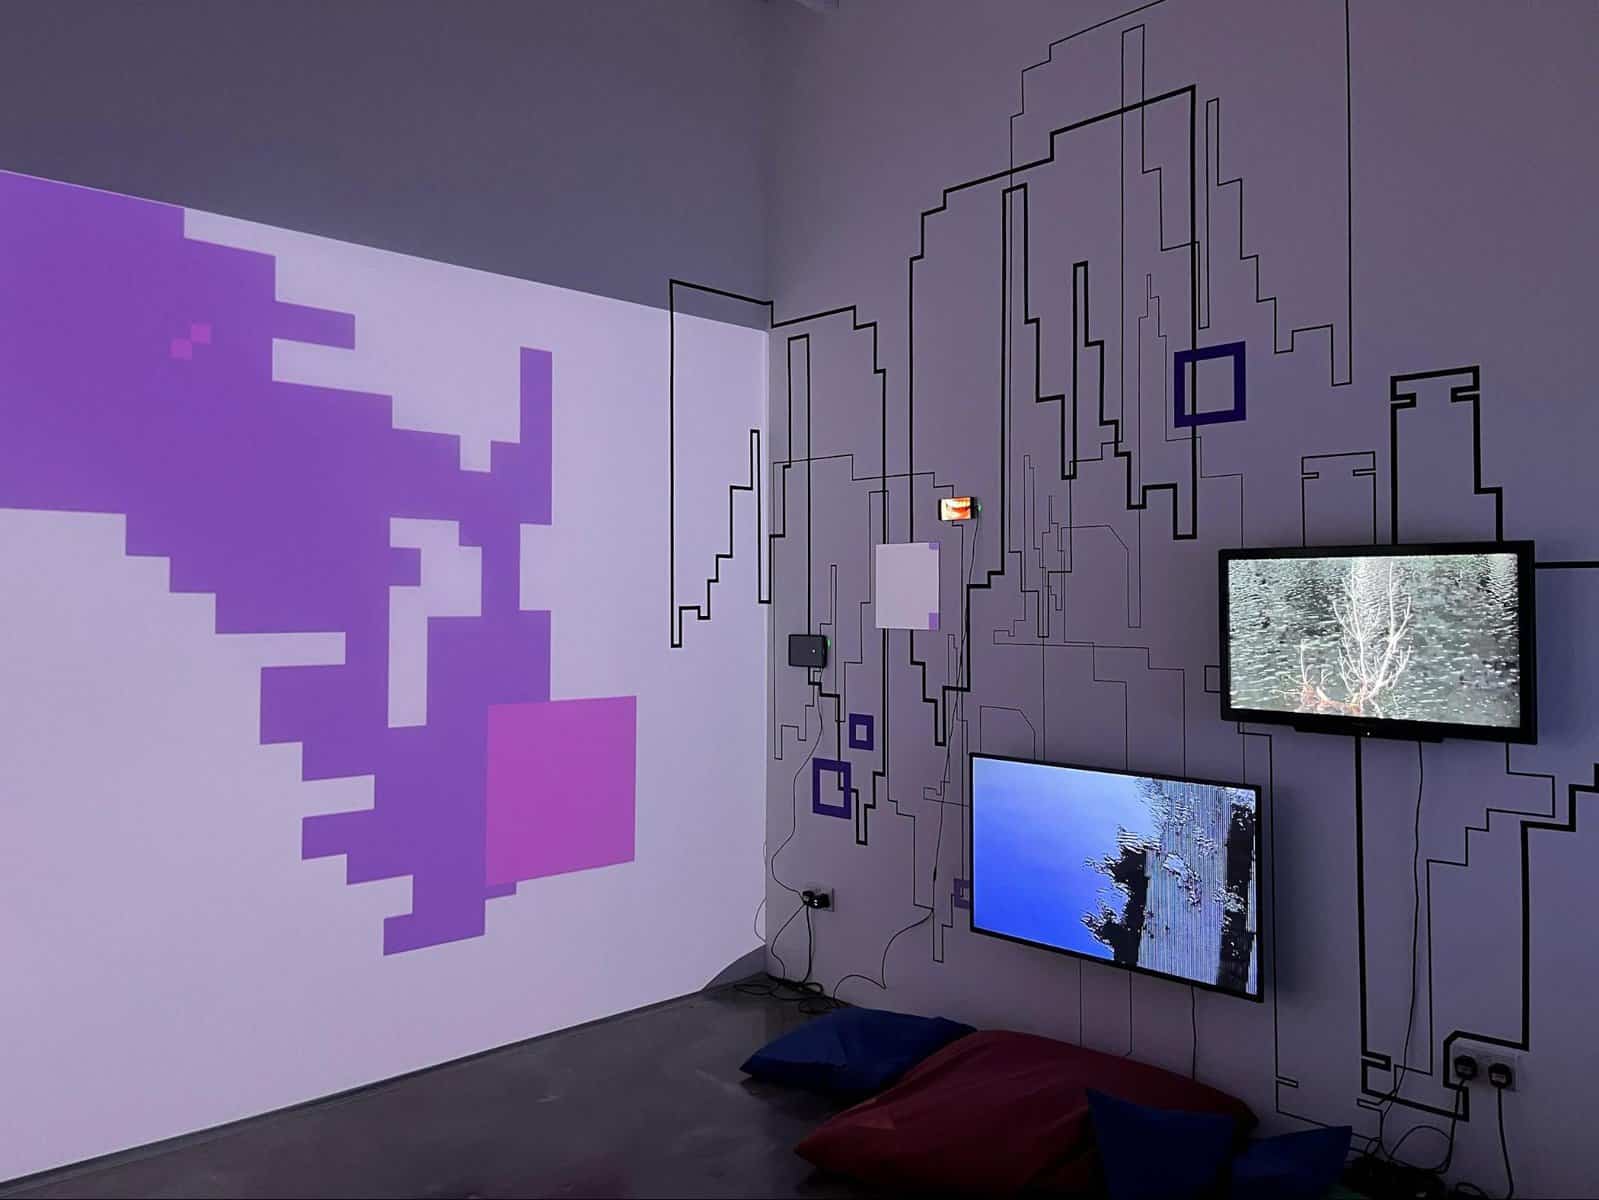 Installation view of Pixel Paradise featuring Pixel River (2023) by Sebastian Mary Tay and Merryn Trevethan. Image credit: Merryn Trevethan.